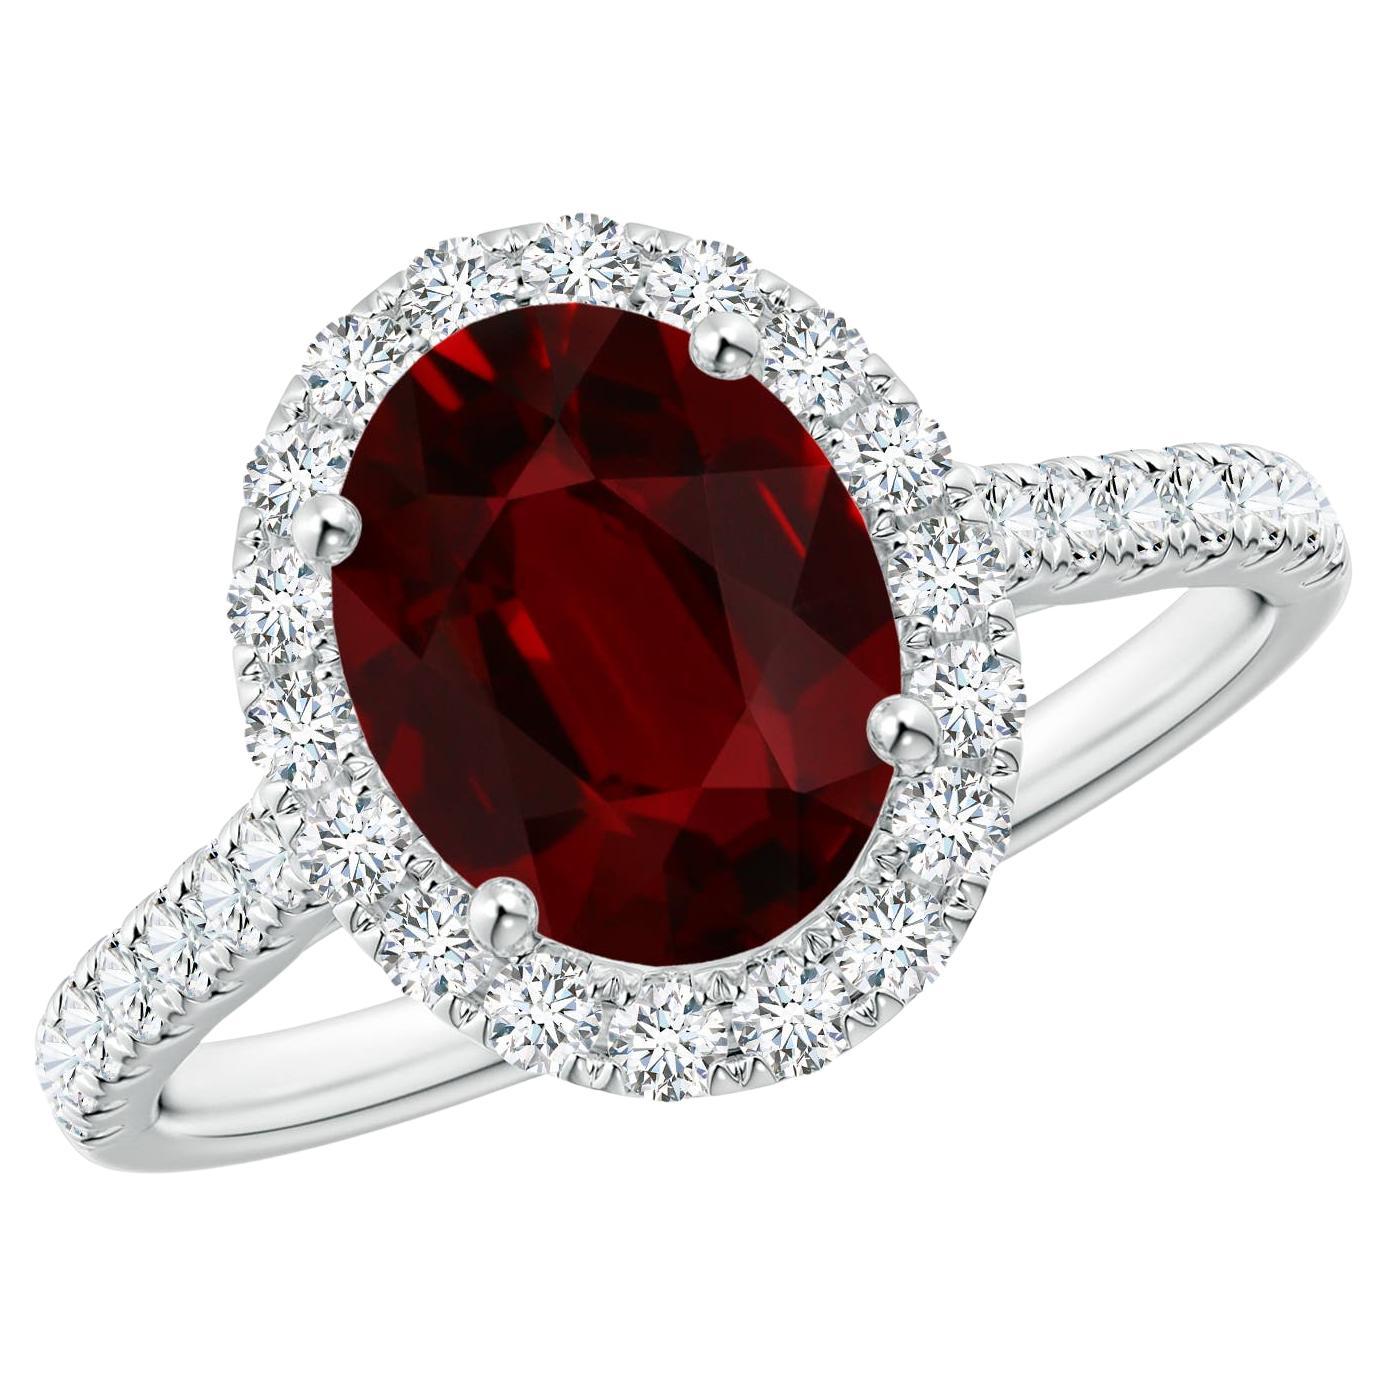 For Sale:  Angara GIA Certified Natural Ruby Halo Ring in White Gold with Diamonds